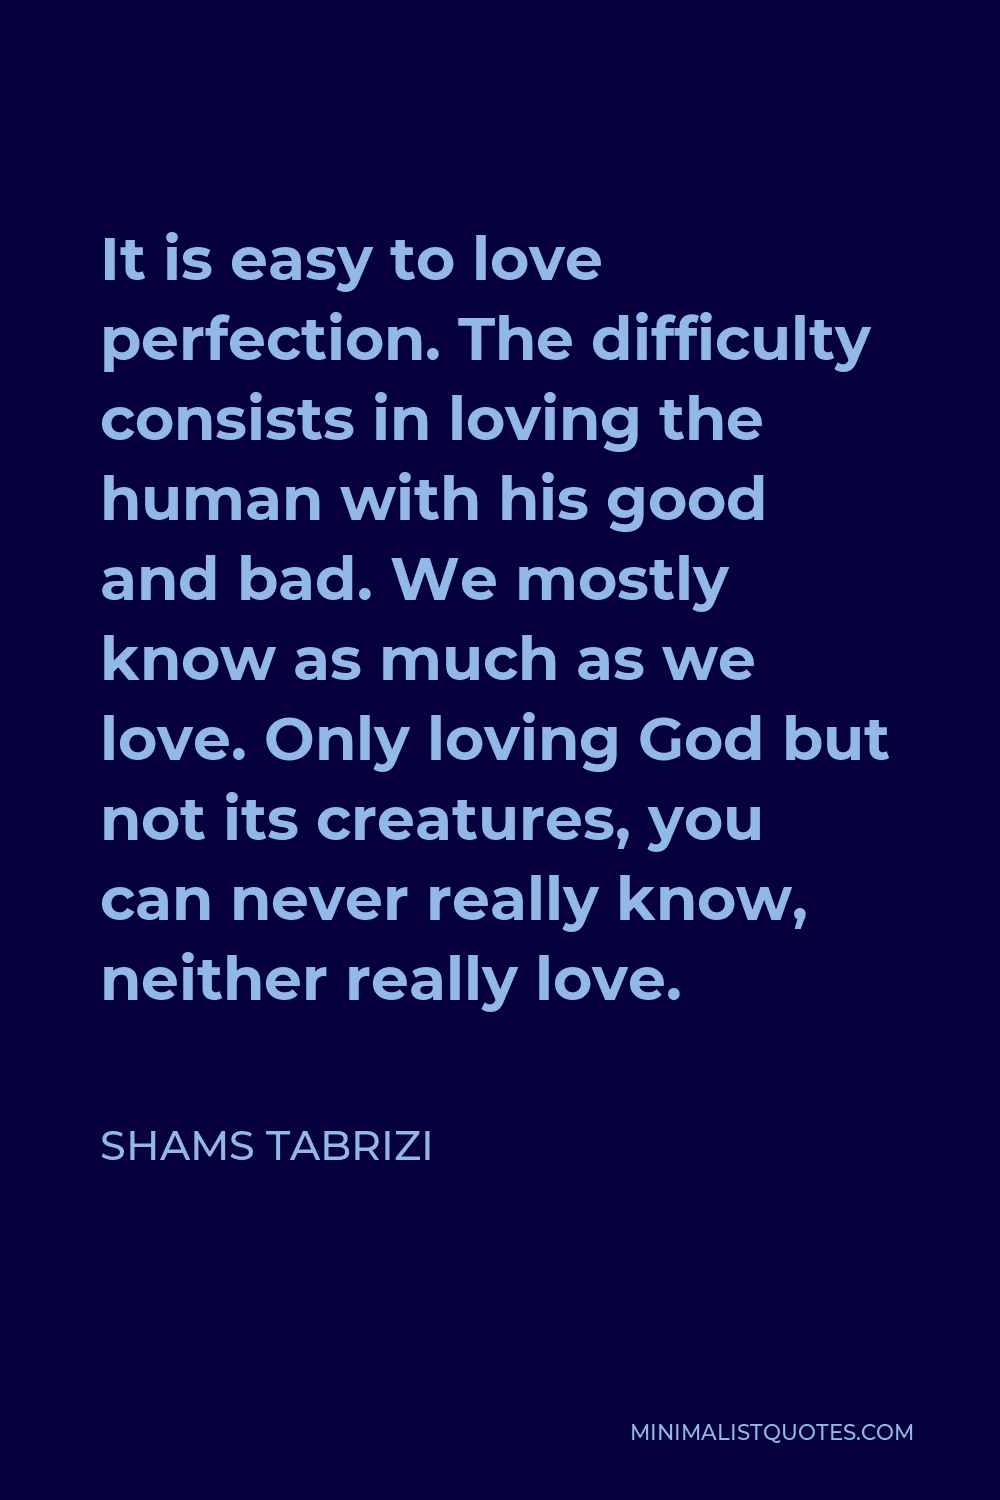 Shams Tabrizi Quote - It is easy to love perfection. The difficulty consists in loving the human with his good and bad. We mostly know as much as we love. Only loving God but not its creatures, you can never really know, neither really love.